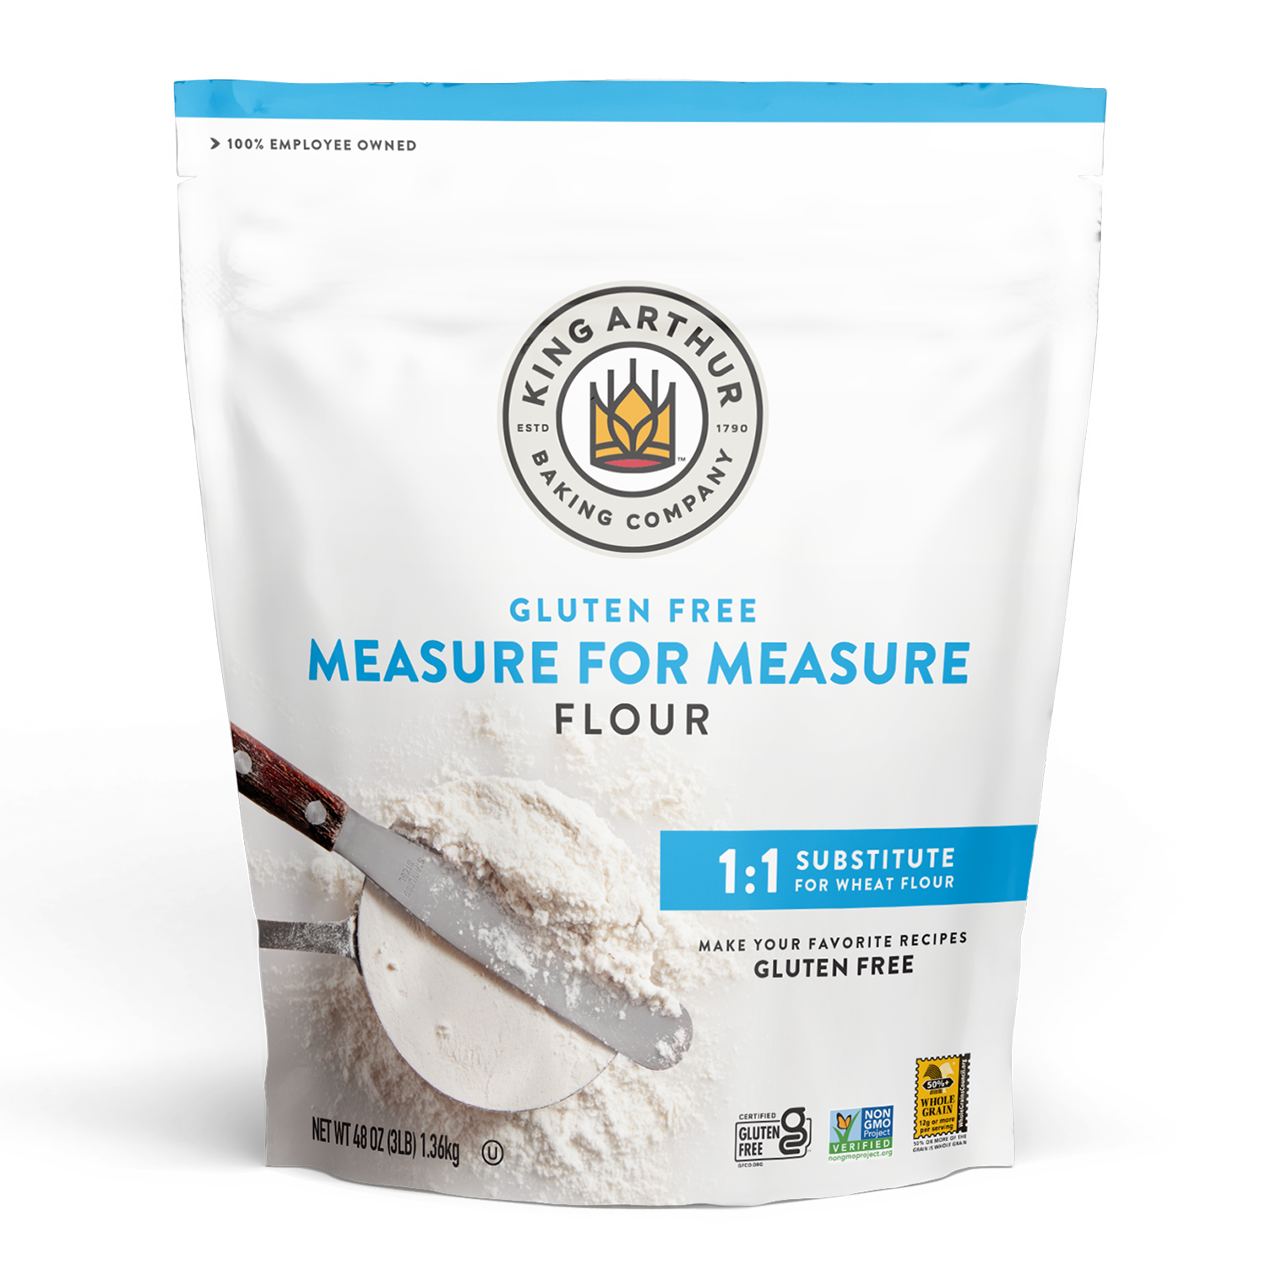 How Many Cups in One Pound of Flour?